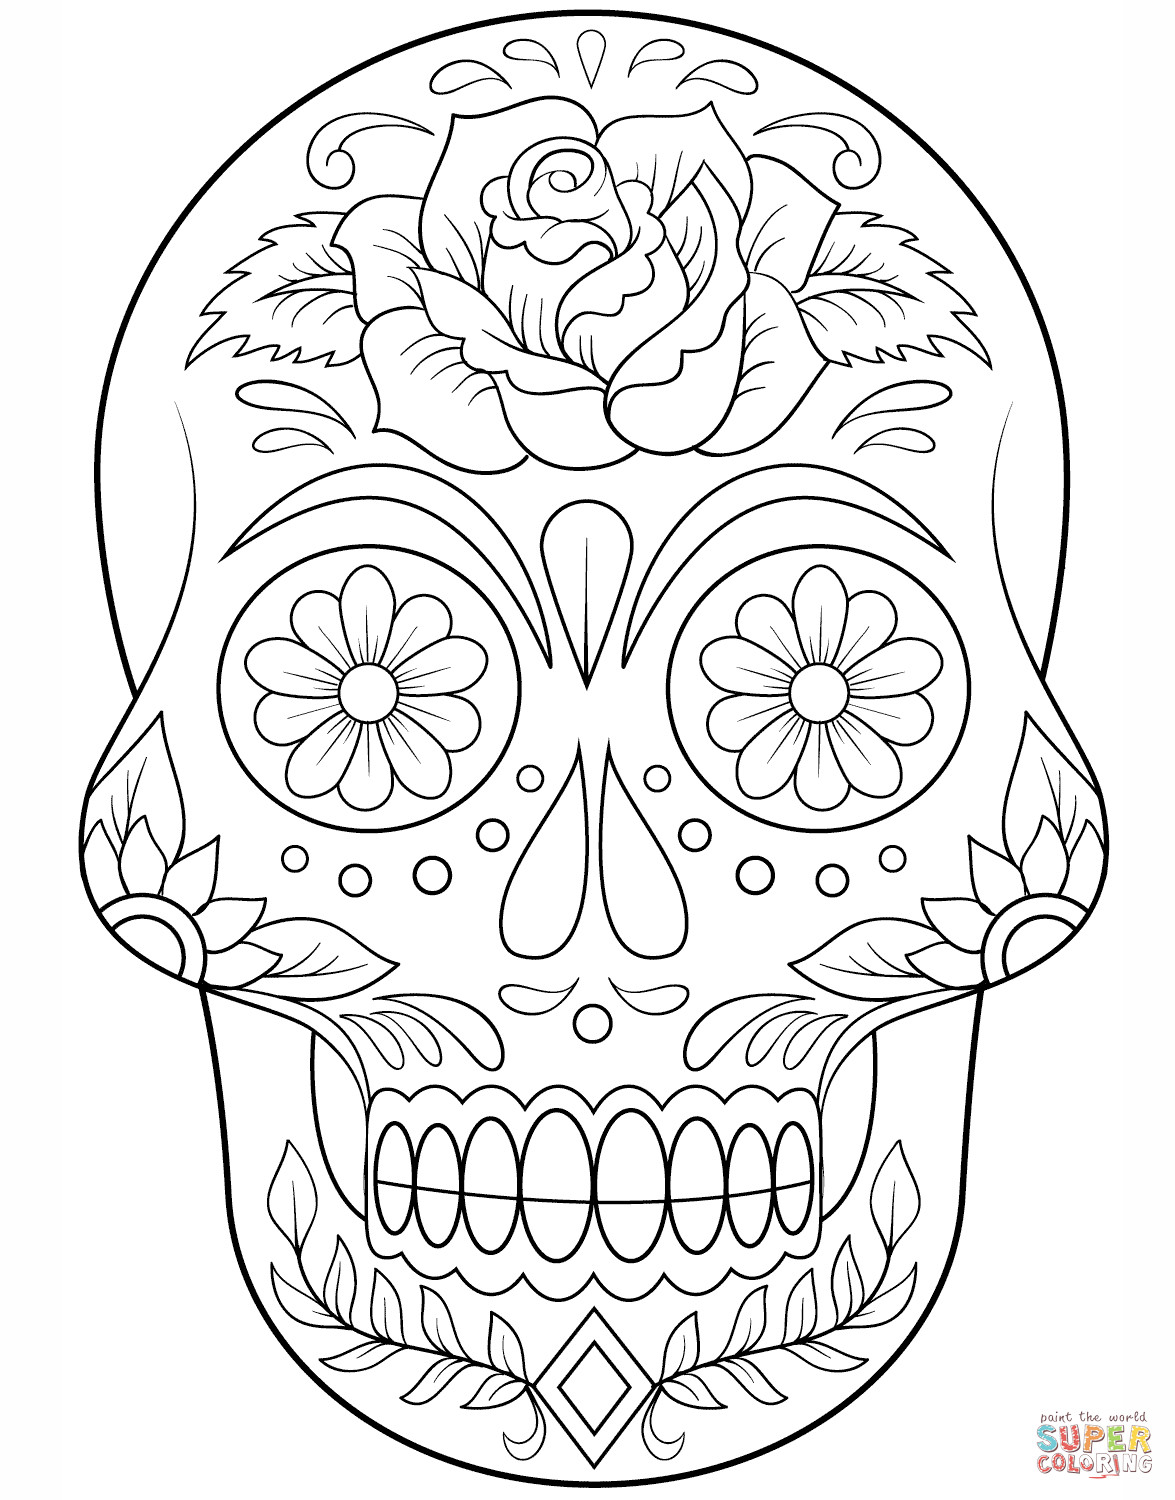 Sugar Skulls Coloring Pages
 Sugar Skull with Flowers coloring page